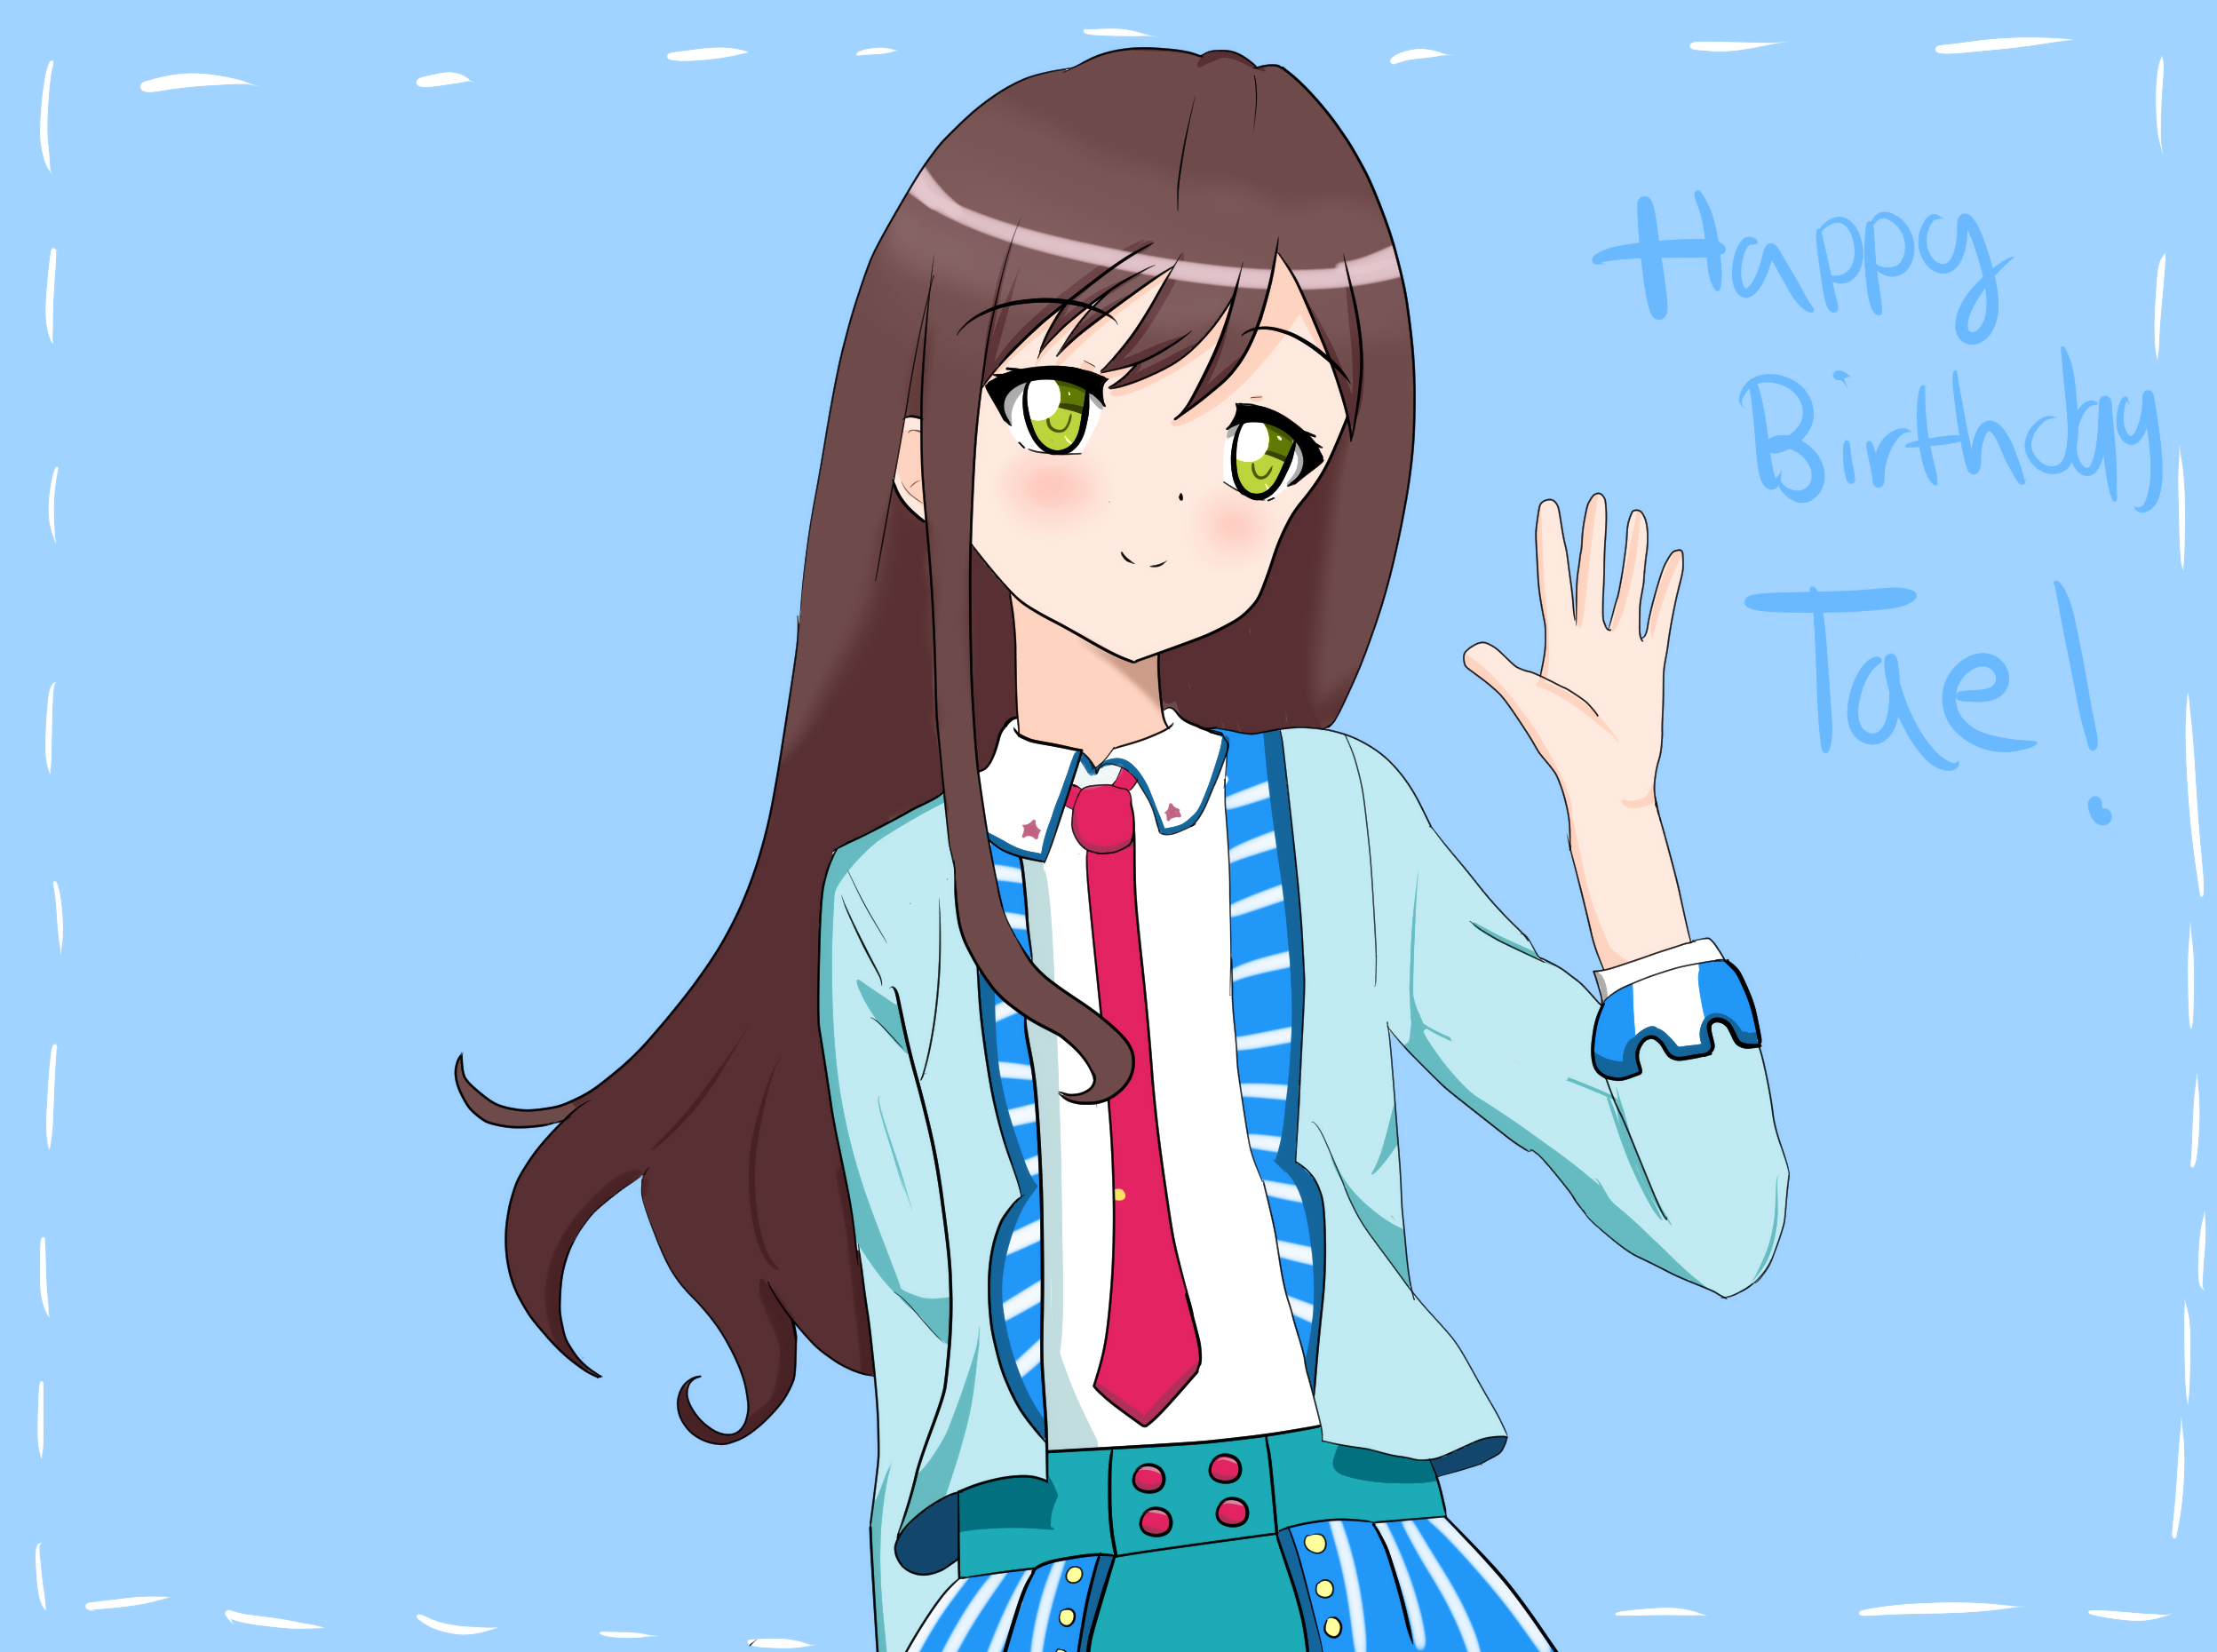     Happy Birthday Tae!
  This is a redraw of the one I did last...